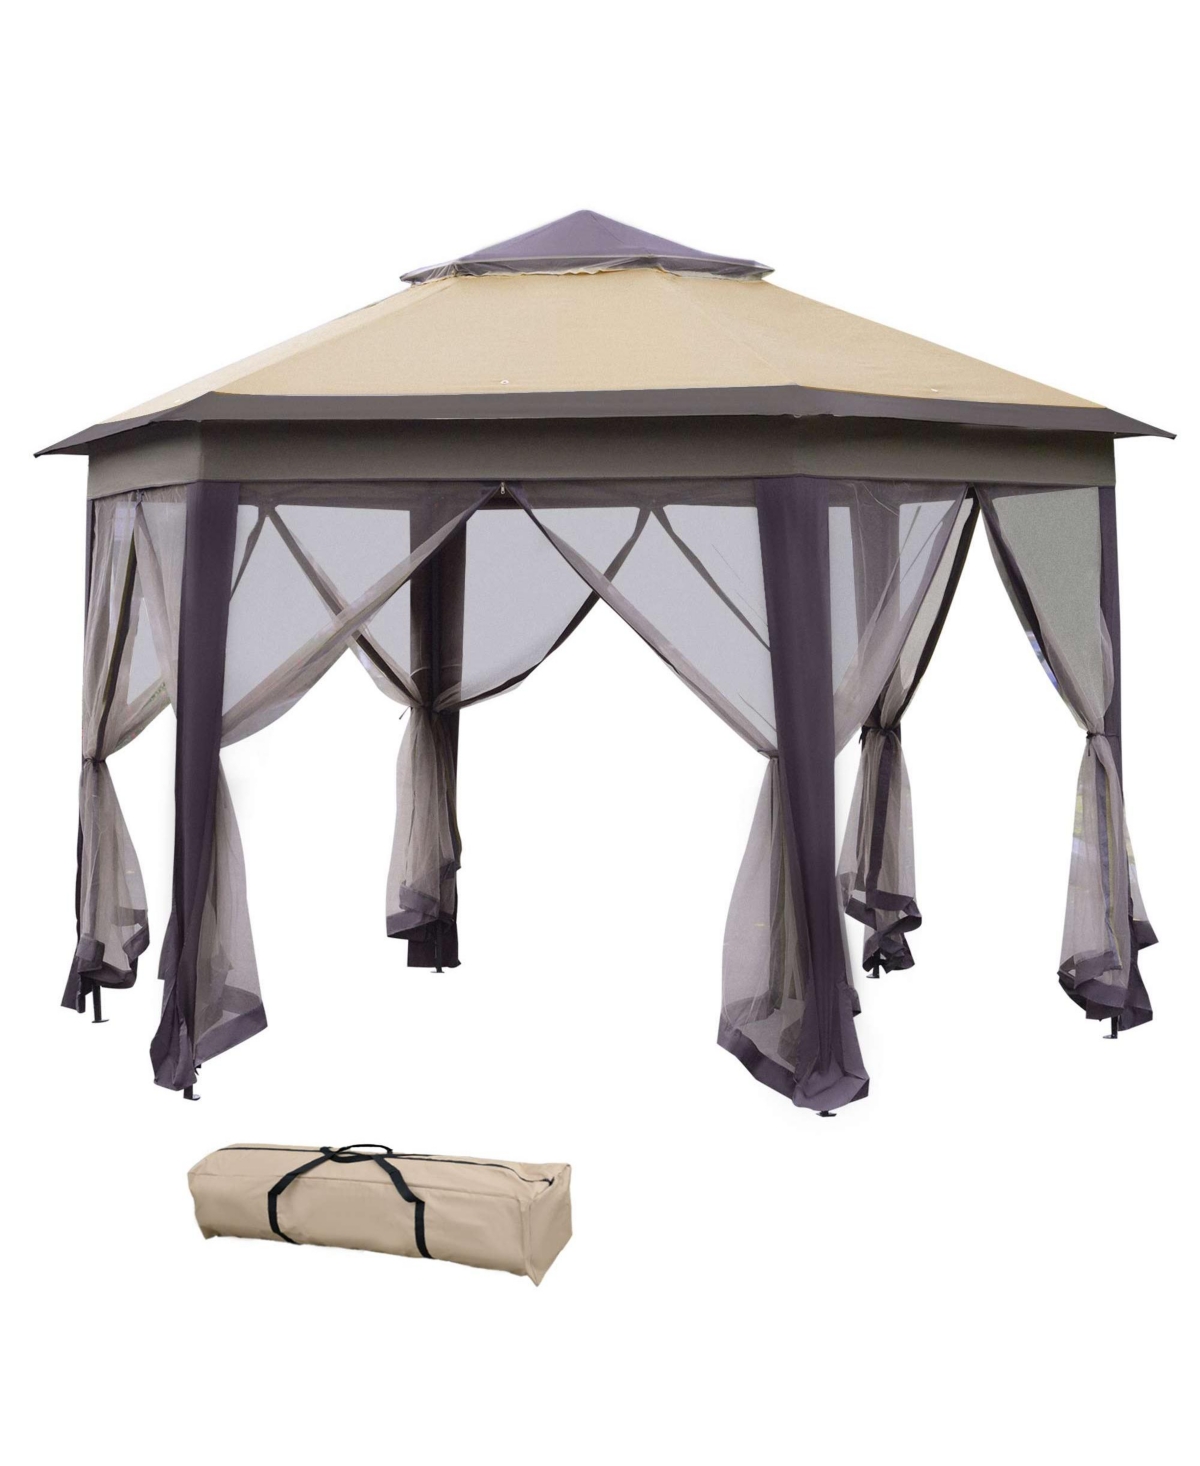 13' x 13' Pop Up Gazebo Hexagonal Canopy with 6 Zippered Mesh Netting, 2-Tier Roof Event Tent with Strong Steel Frame for Patio Backyard Gard